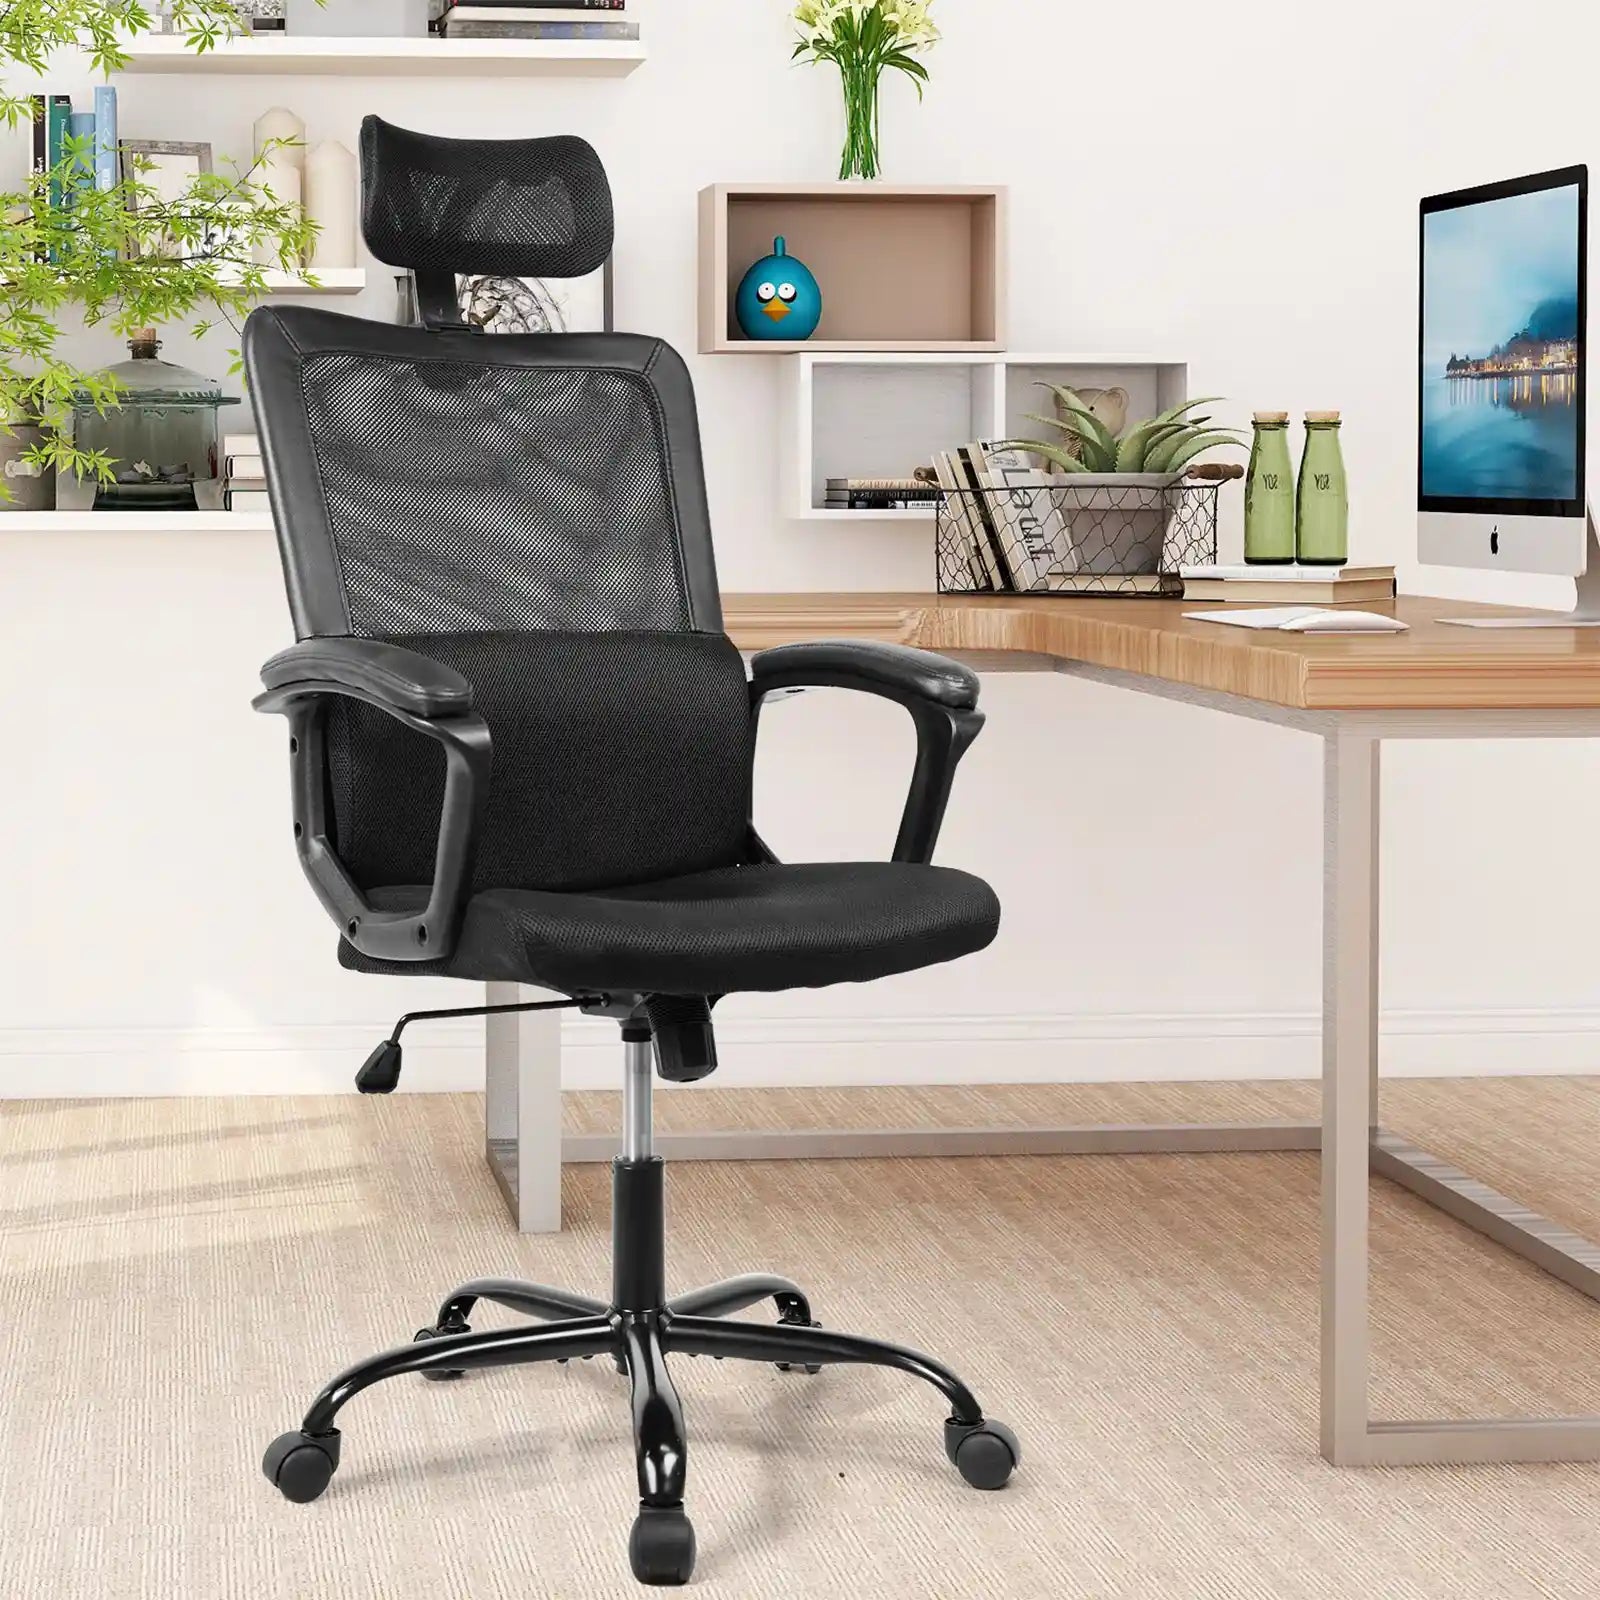 Ergonomic Chairs , Mesh Desk Chair High Back Computer Chair with Headrest